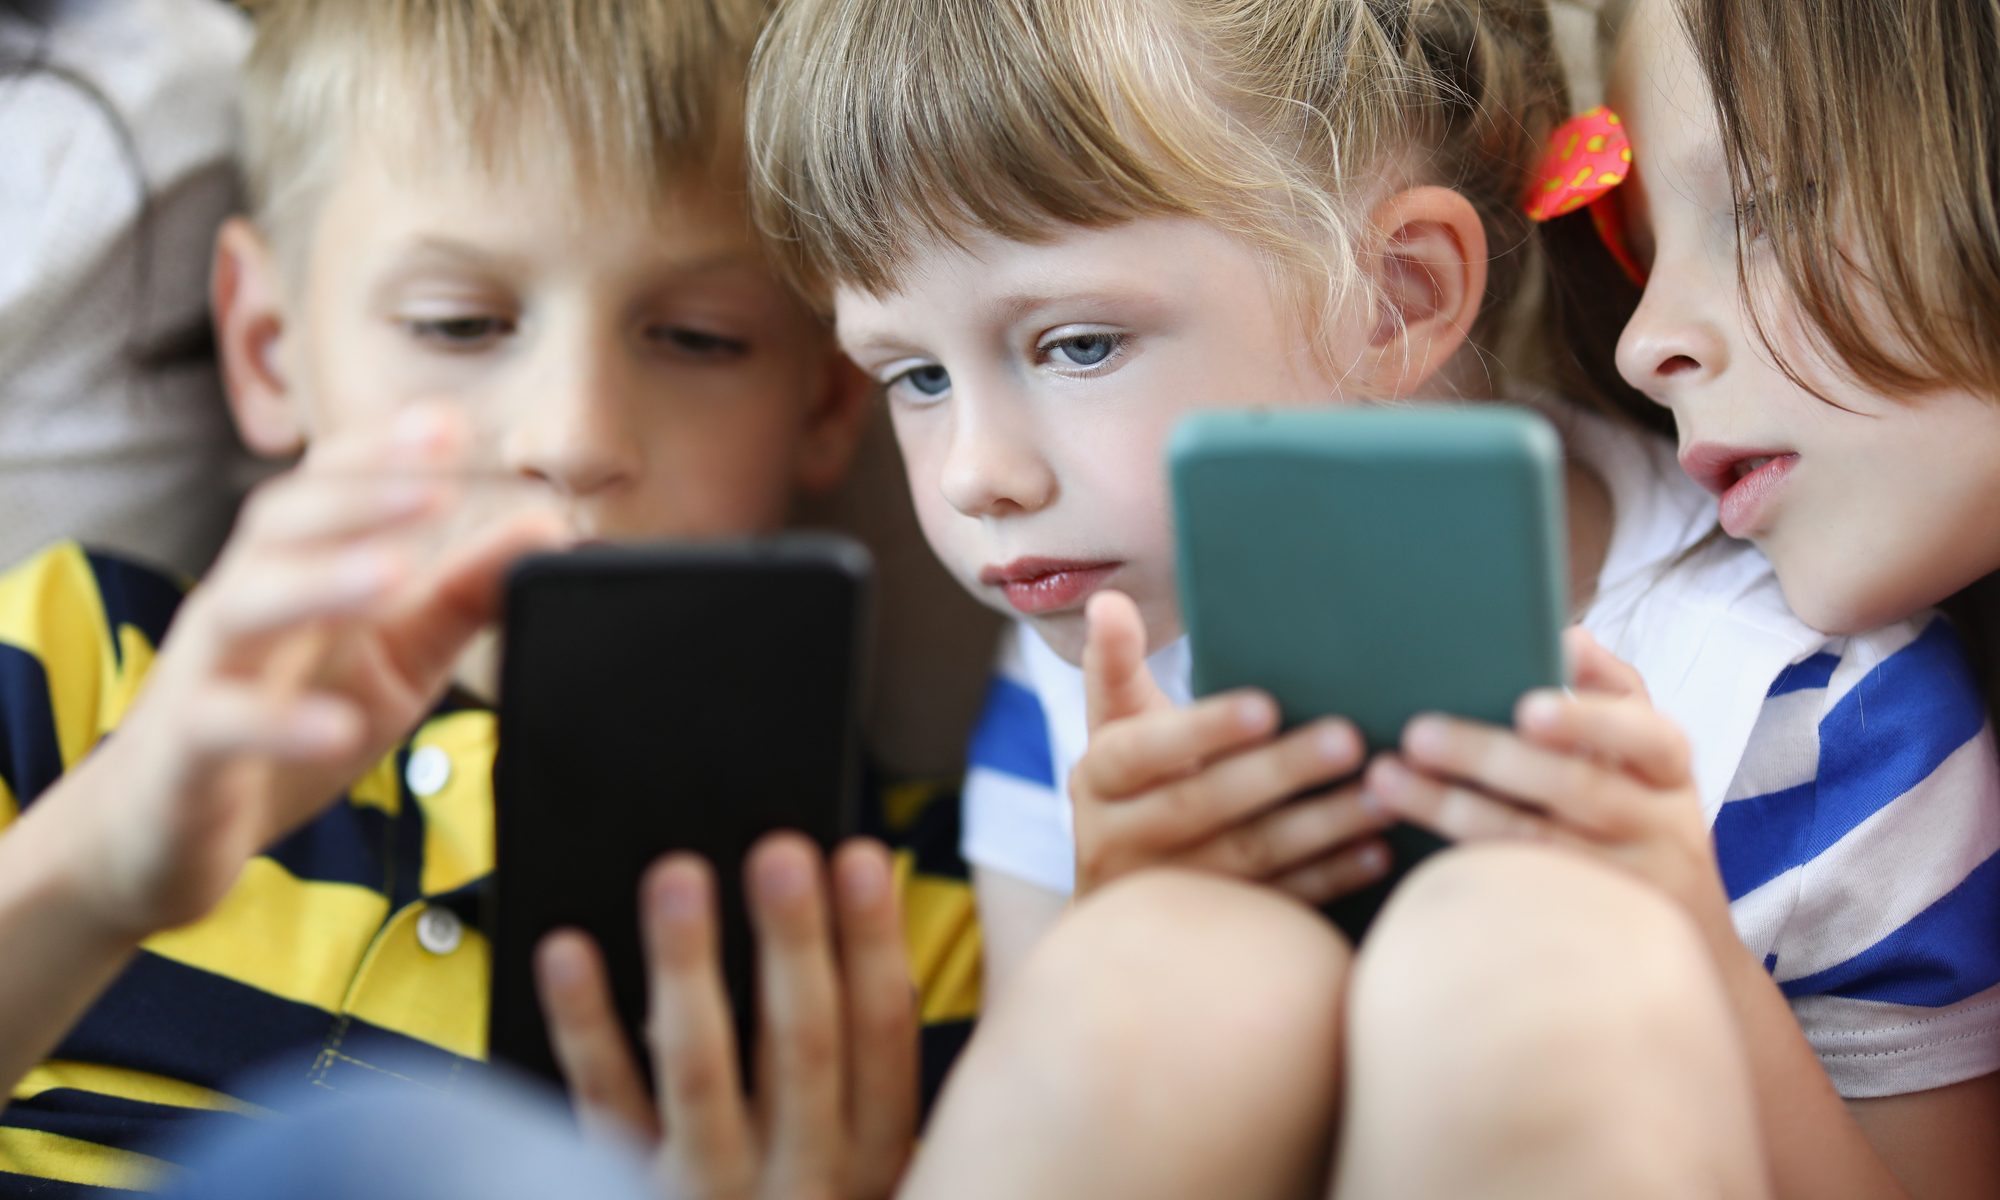 photograph of children playing on smartphone